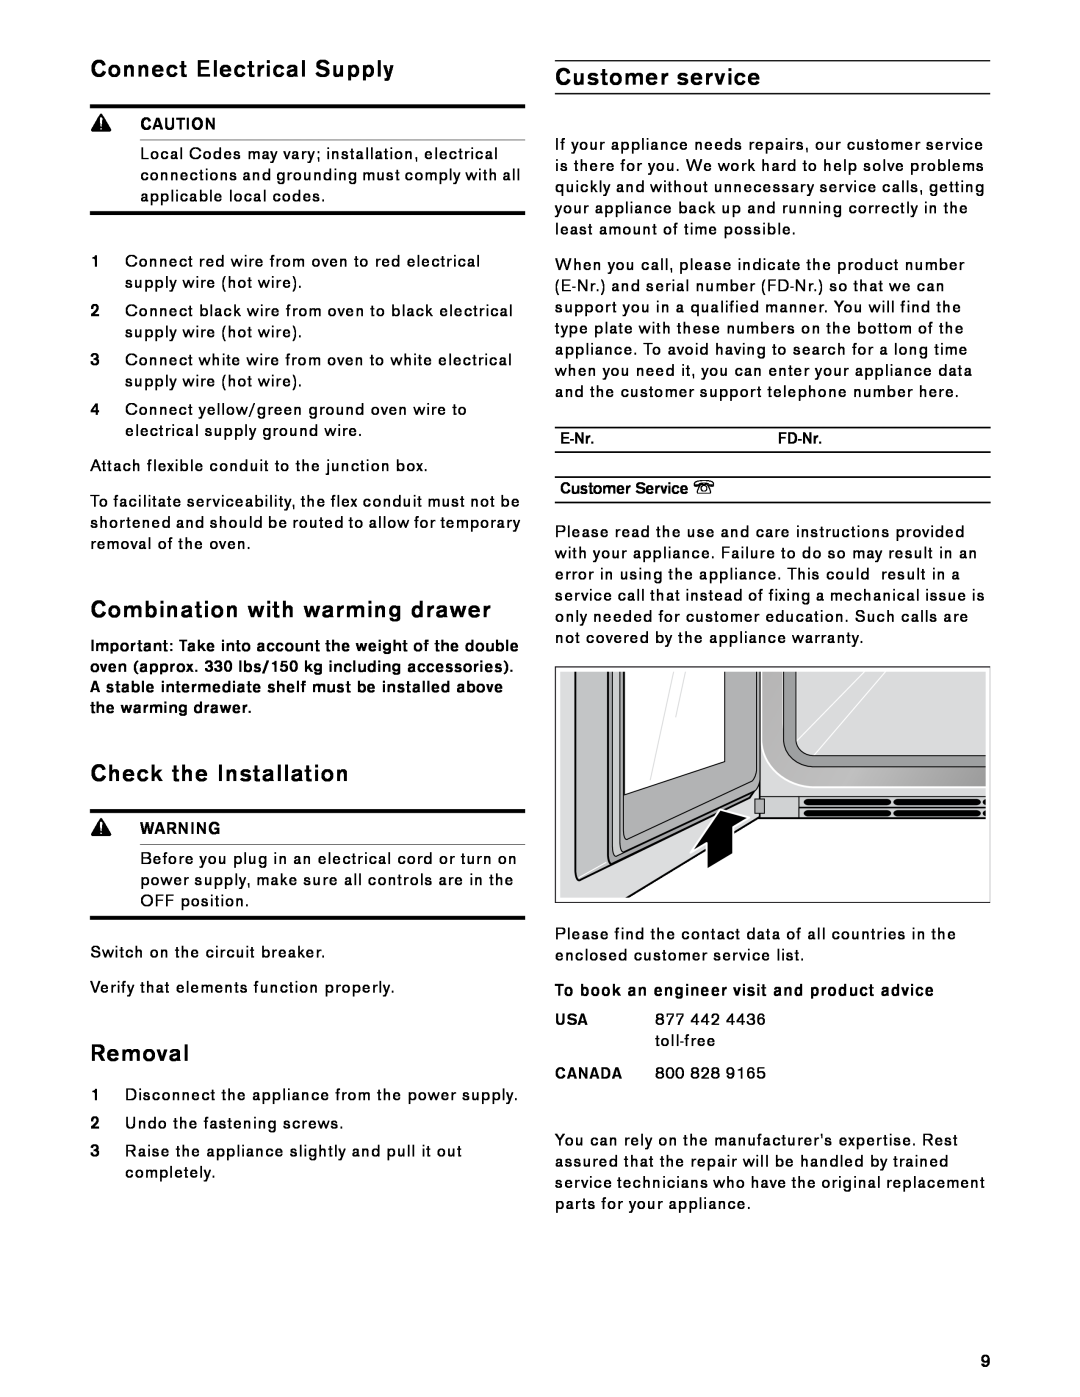 Gaggenau BX 480 610 Connect Electrical Supply, Combination with warming drawer, Check the Installation, Removal, 9CAUTION 